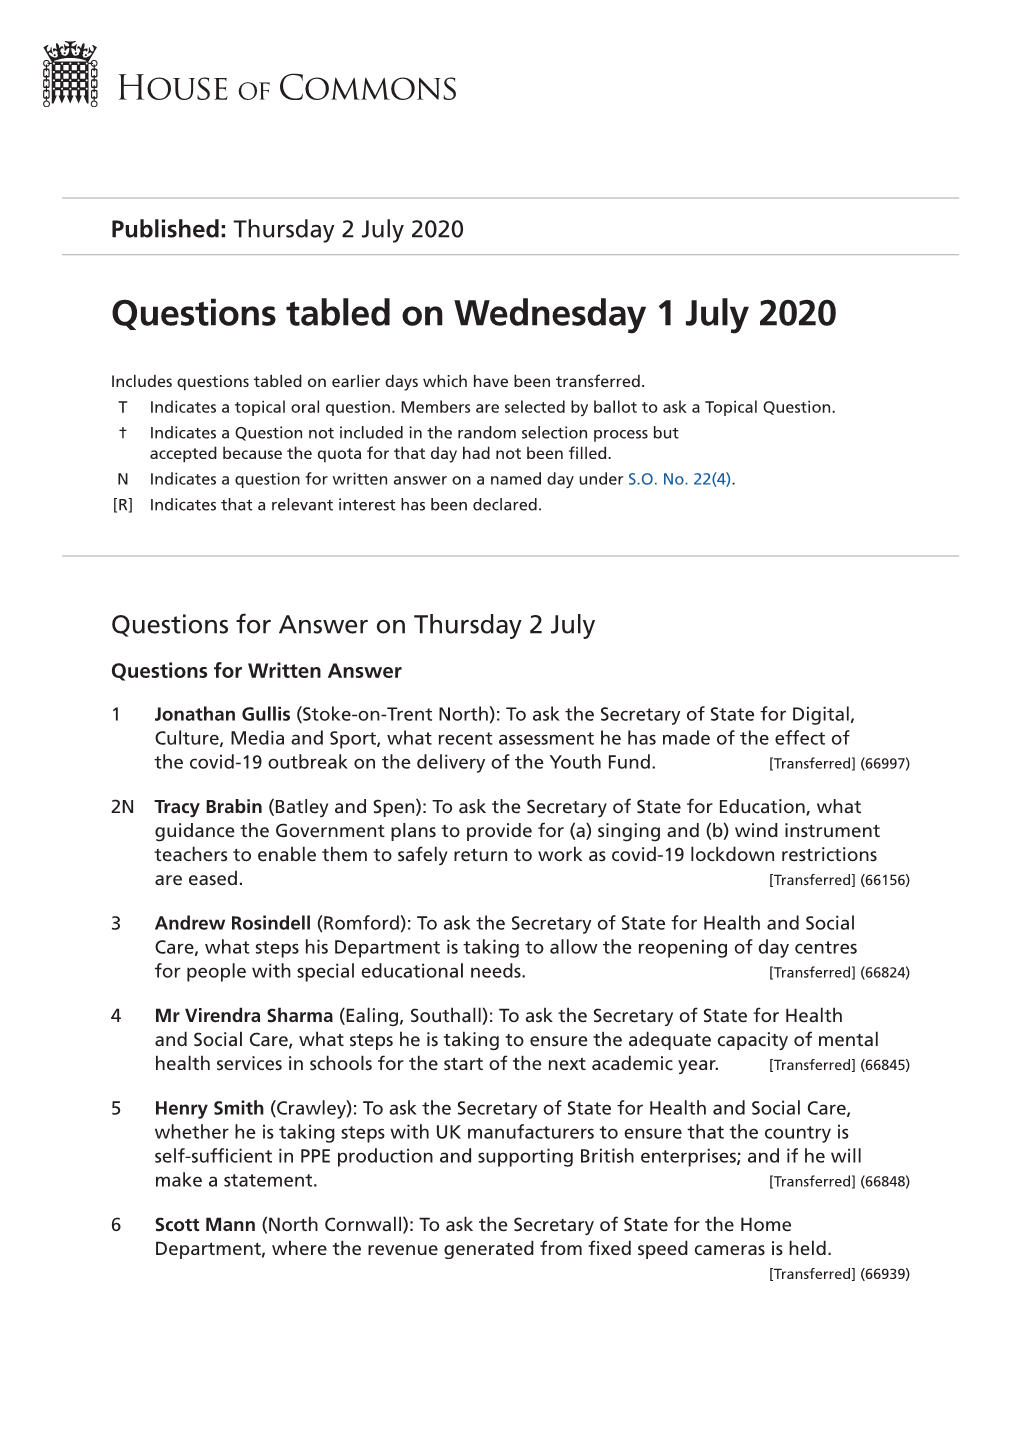 Questions Tabled on Wed 1 Jul 2020